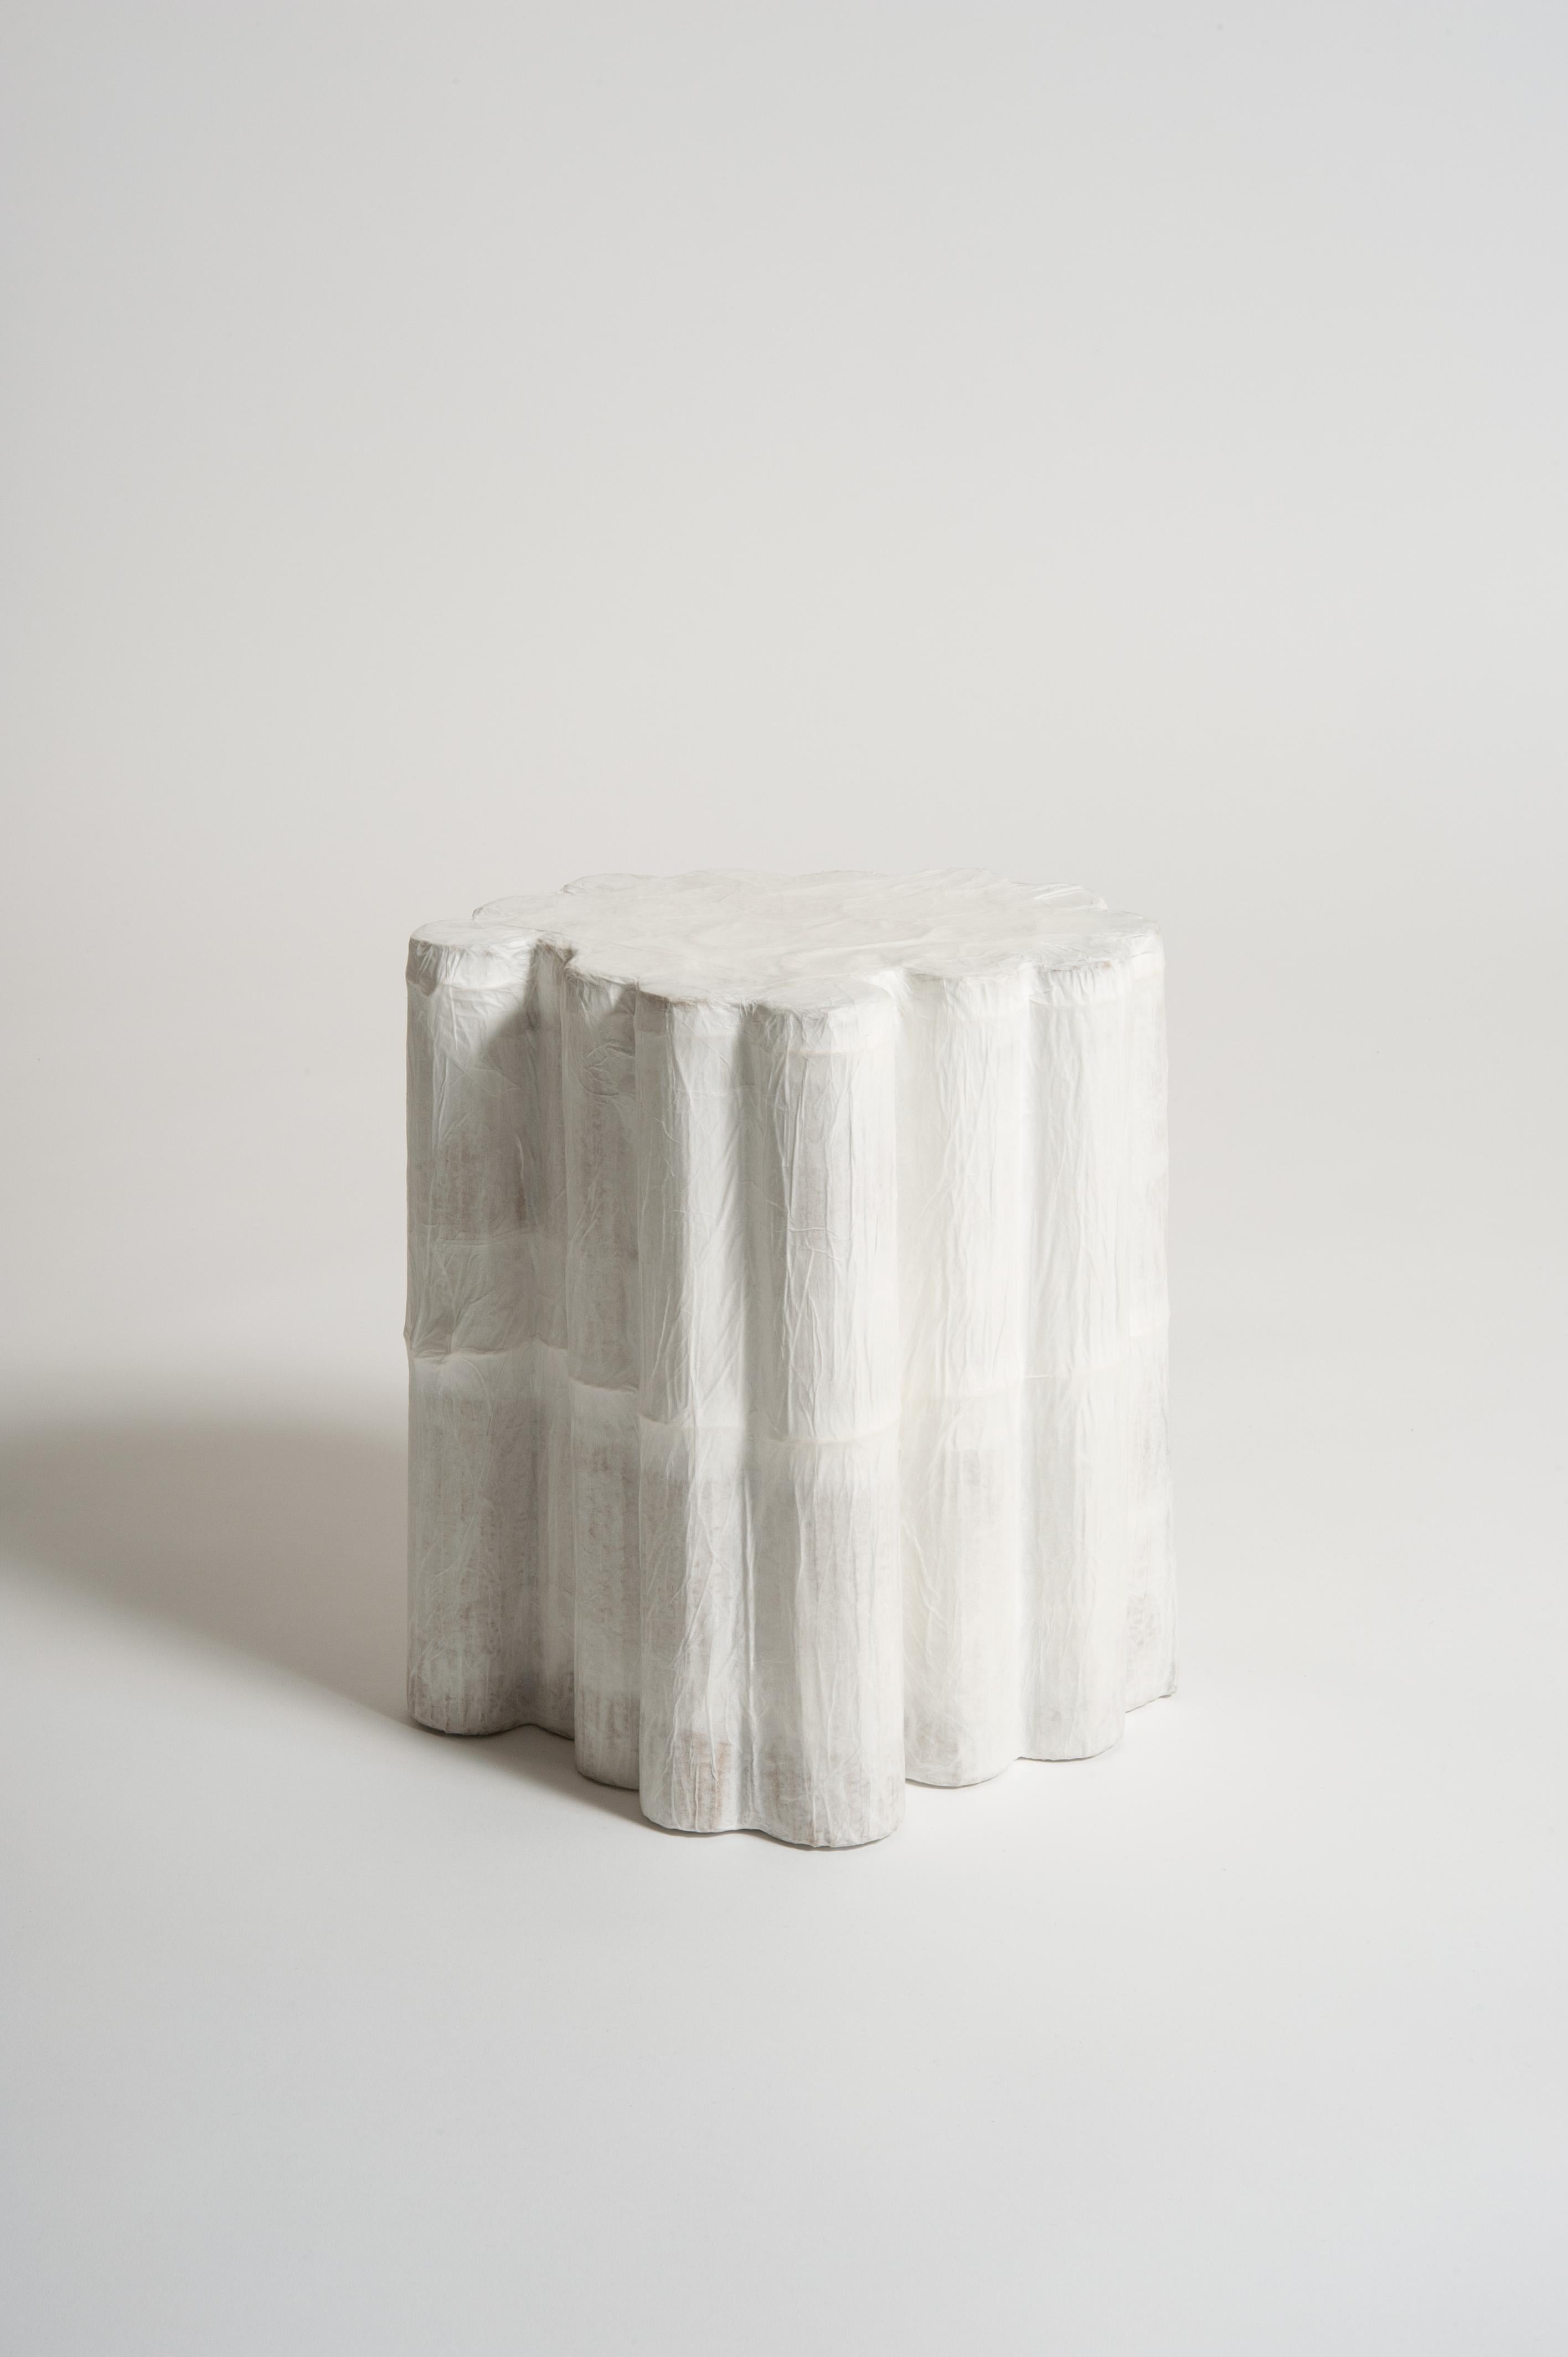 Stump low stool by Studio Yoon Seok-hyeon
Dimensions: W 30 x H 30
Materials: Paper (mostly recycled) and natural adhesive
1.5kg

It is available to customize various sizes, colors, heights, and even shapes of stool, table, and lamp
and to